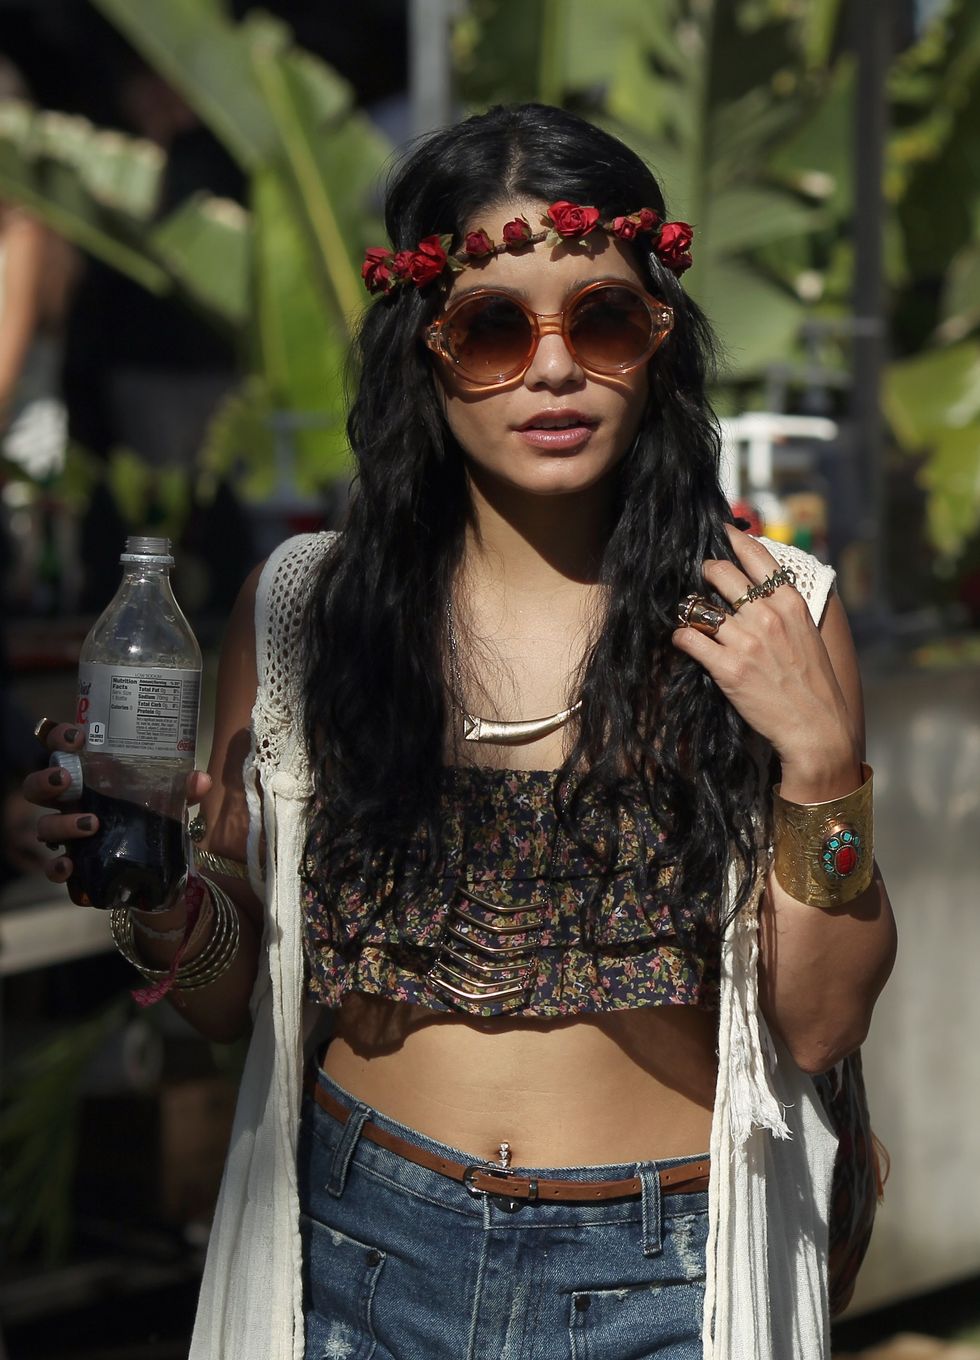 vanessa hudgens in a boho chic outfit at coachella